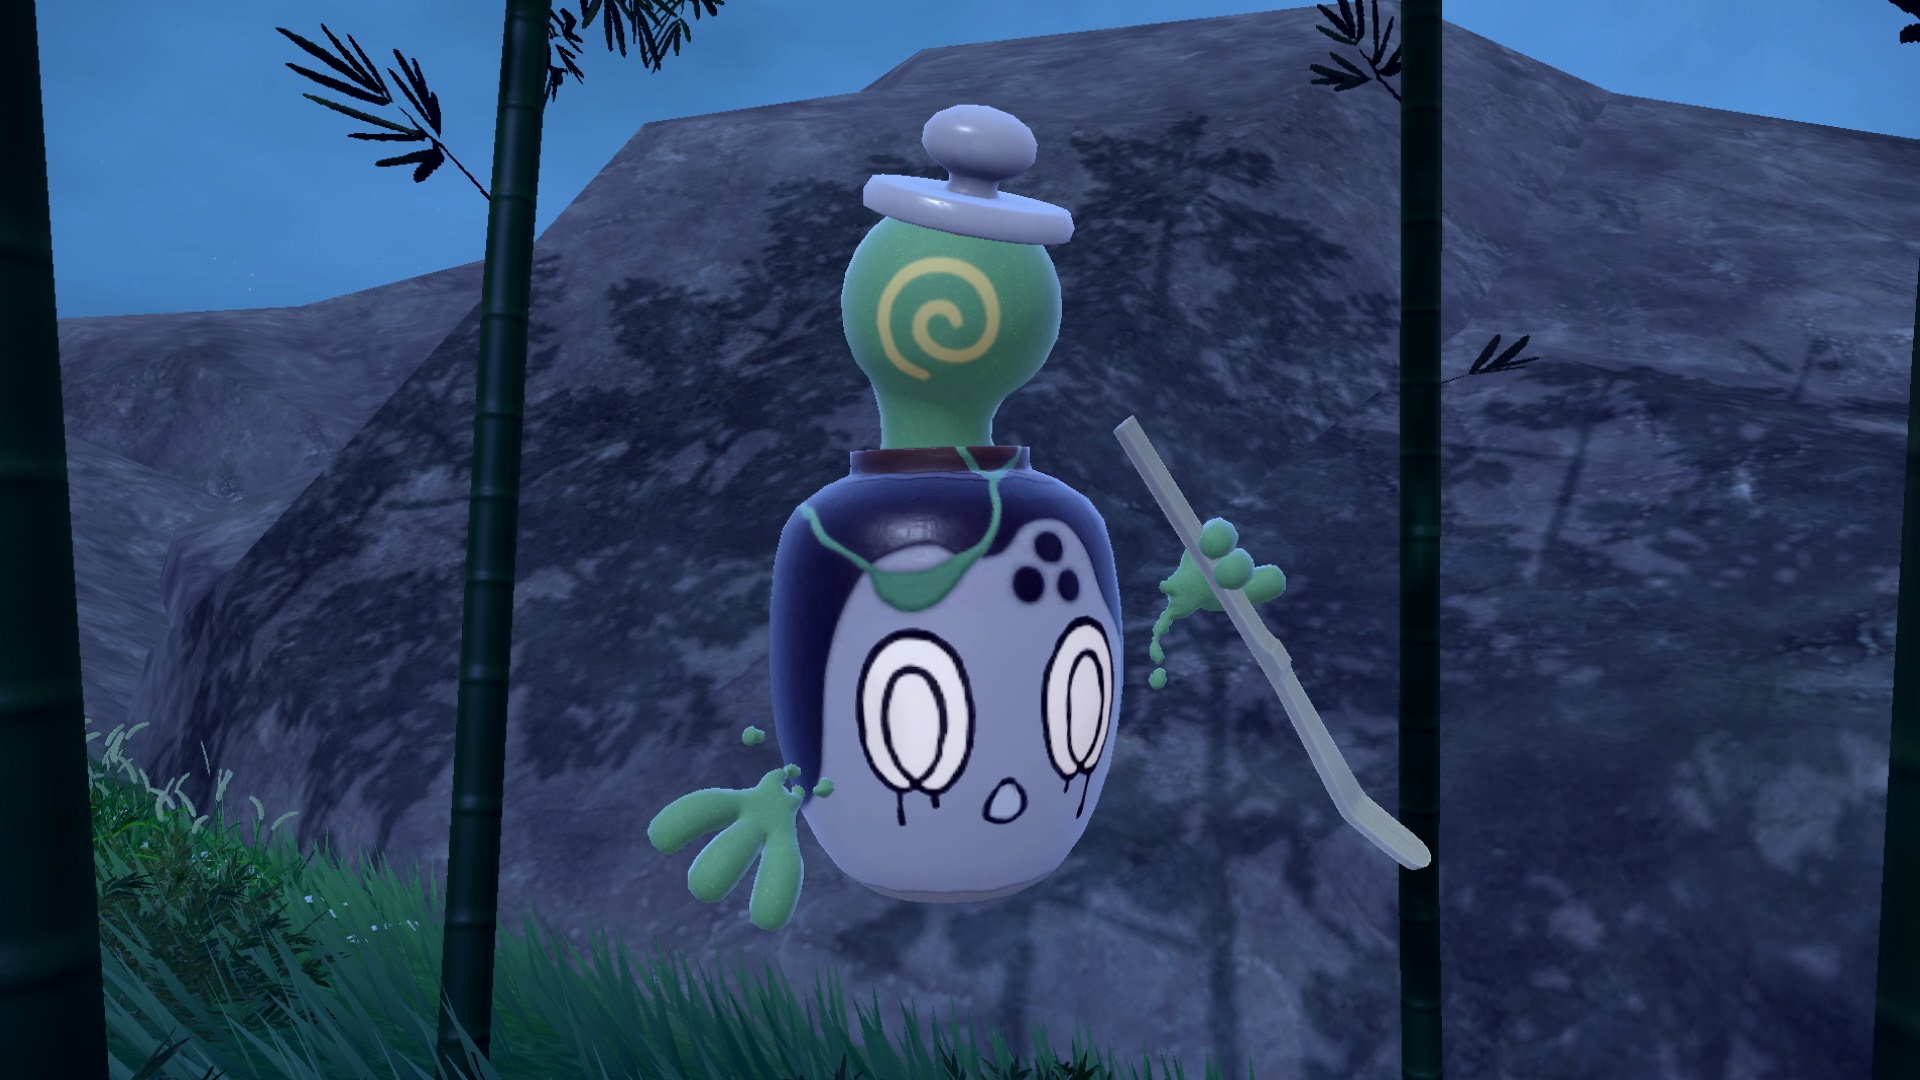 An image of the new Polteagiest Pokémon, Poltchagiest. Poltchagiest looks like a tiny tea caddy with a crack in it and a painted face on it. It’s floating in the air.  